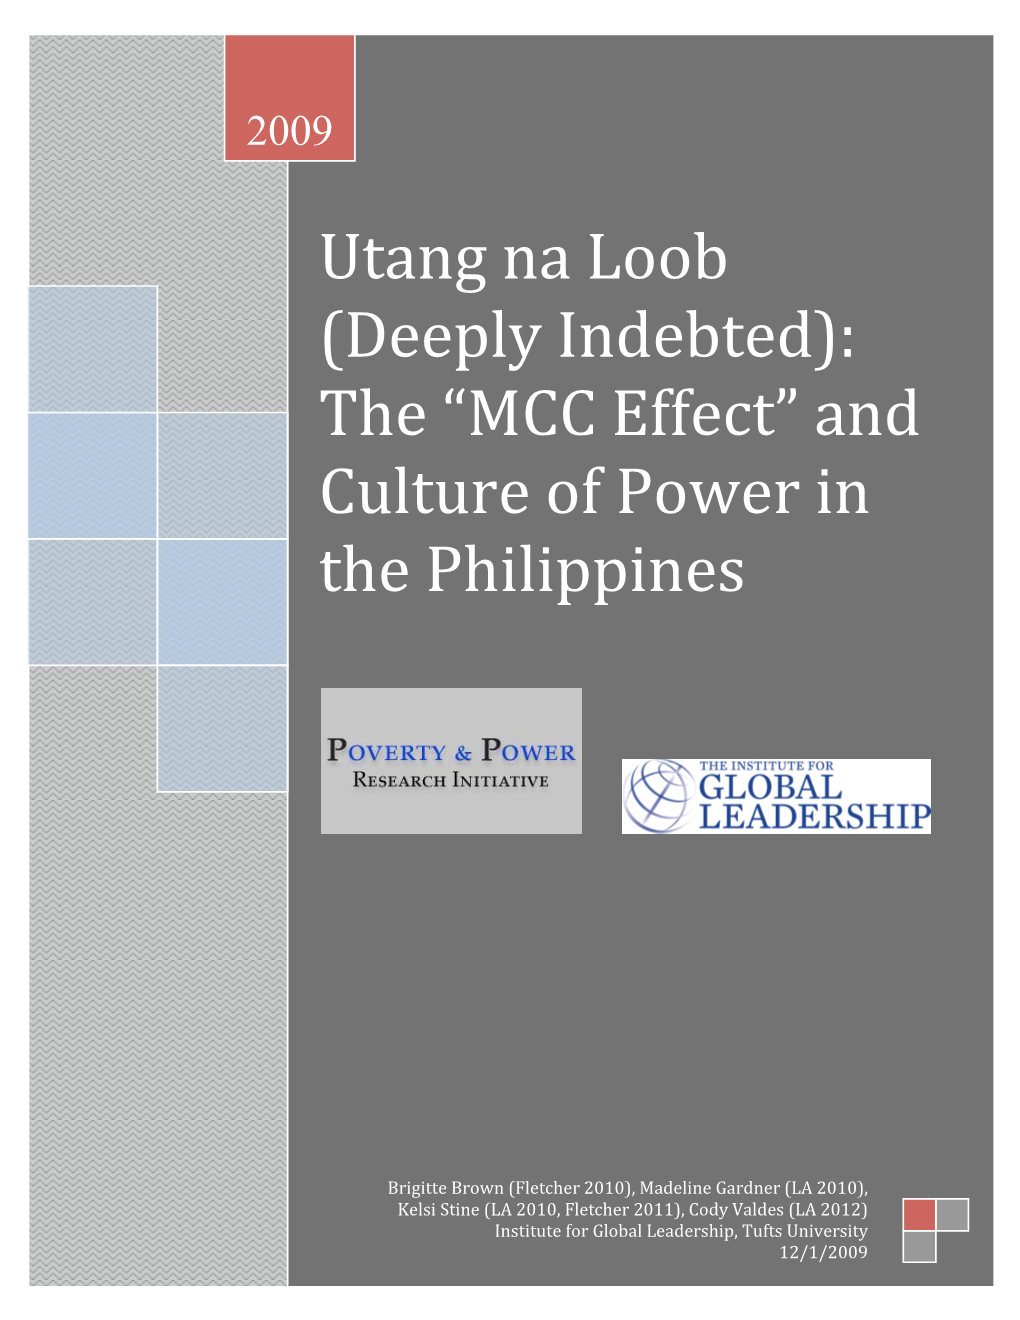 Utang Na Loob (Deeply Indebted): the “MCC Effect” and Culture of Power in the Philippines